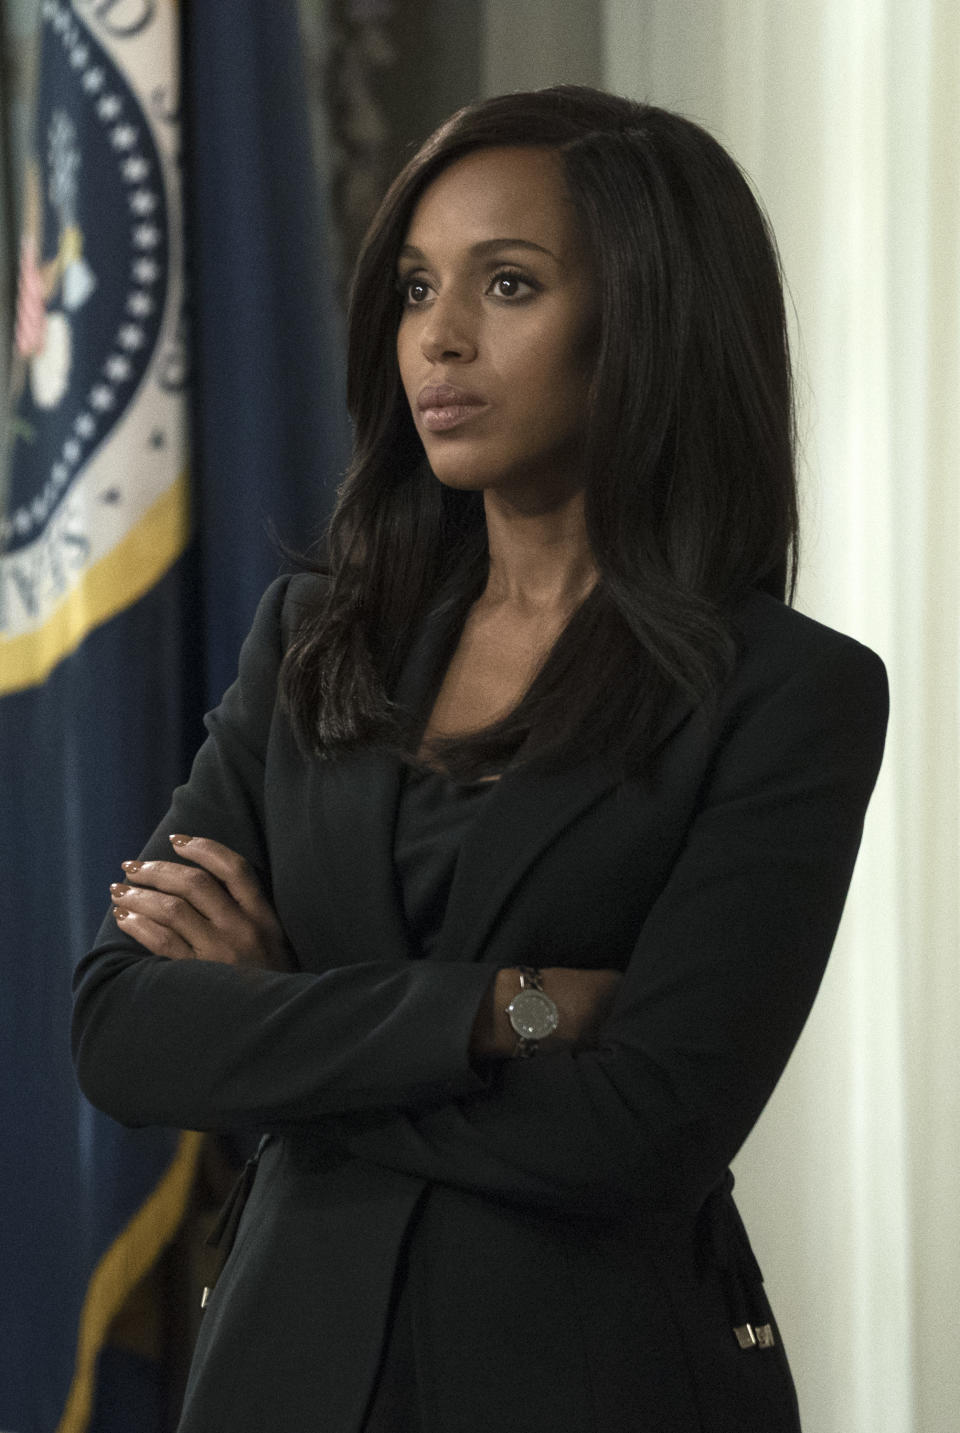 Kerry as Olivia Pope on Scandal standing with her arms folded